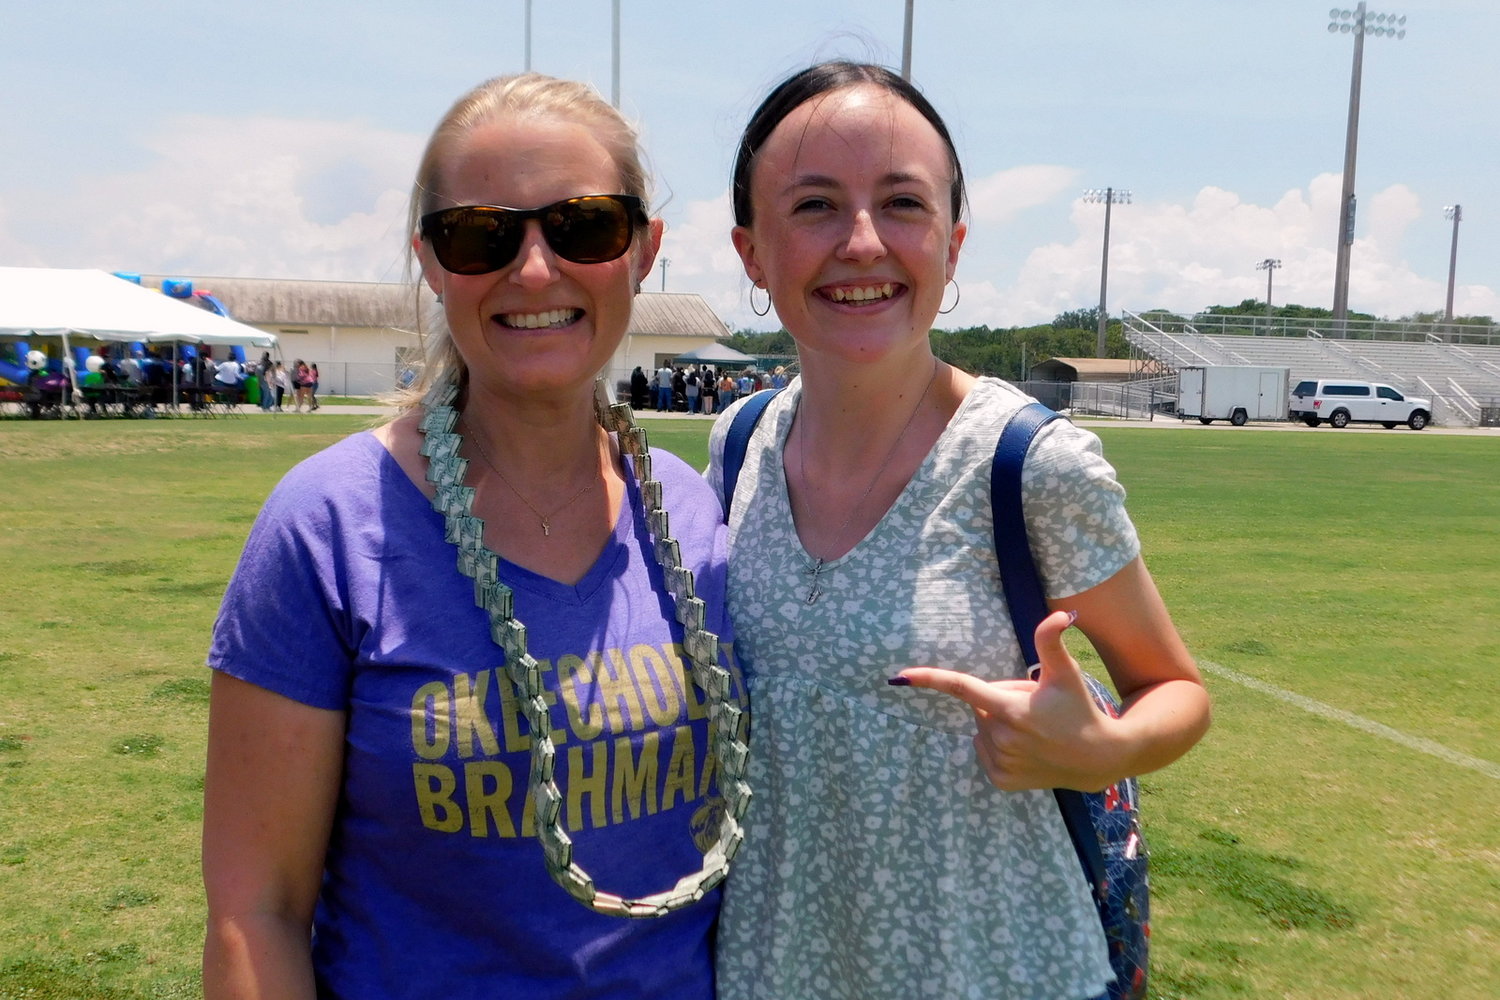 Amanda Riedel (left) with the money lei winner Madison Henry (right).